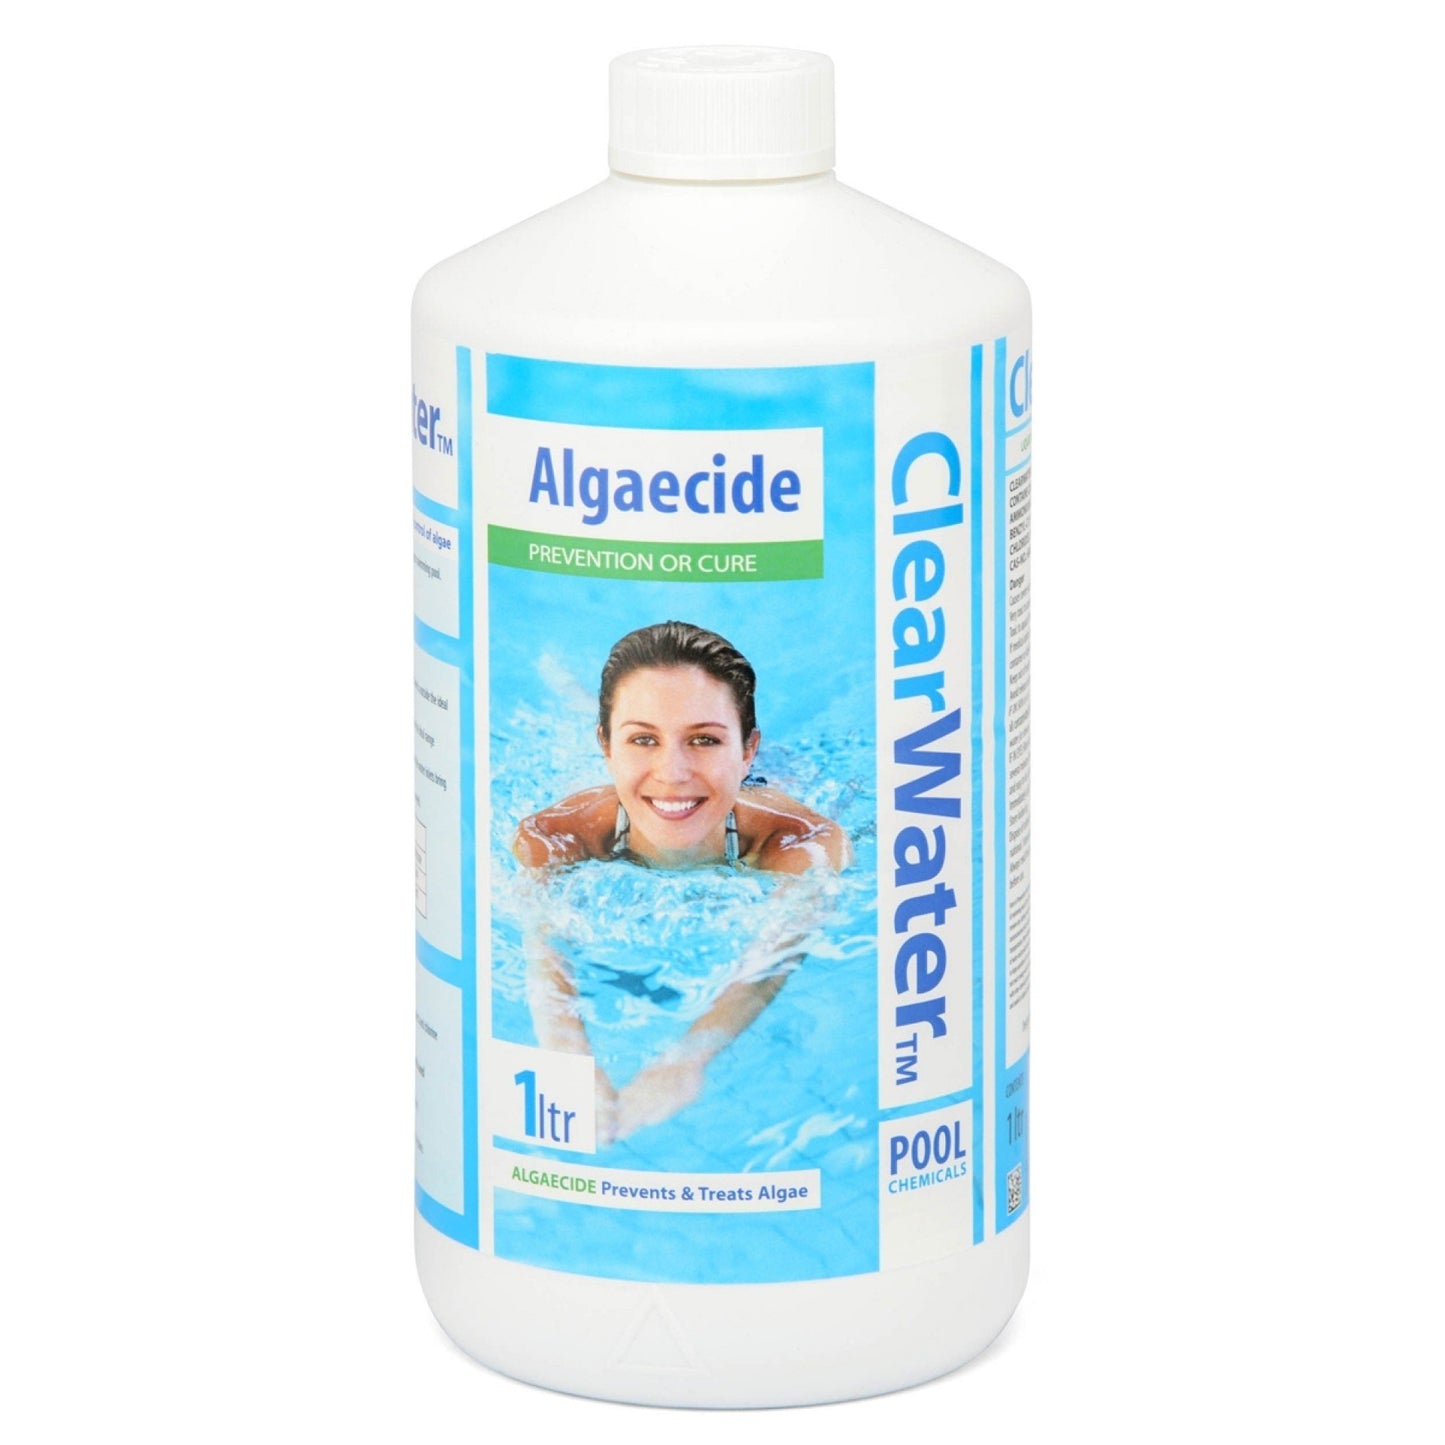 Clearwater Algaecide (1L)